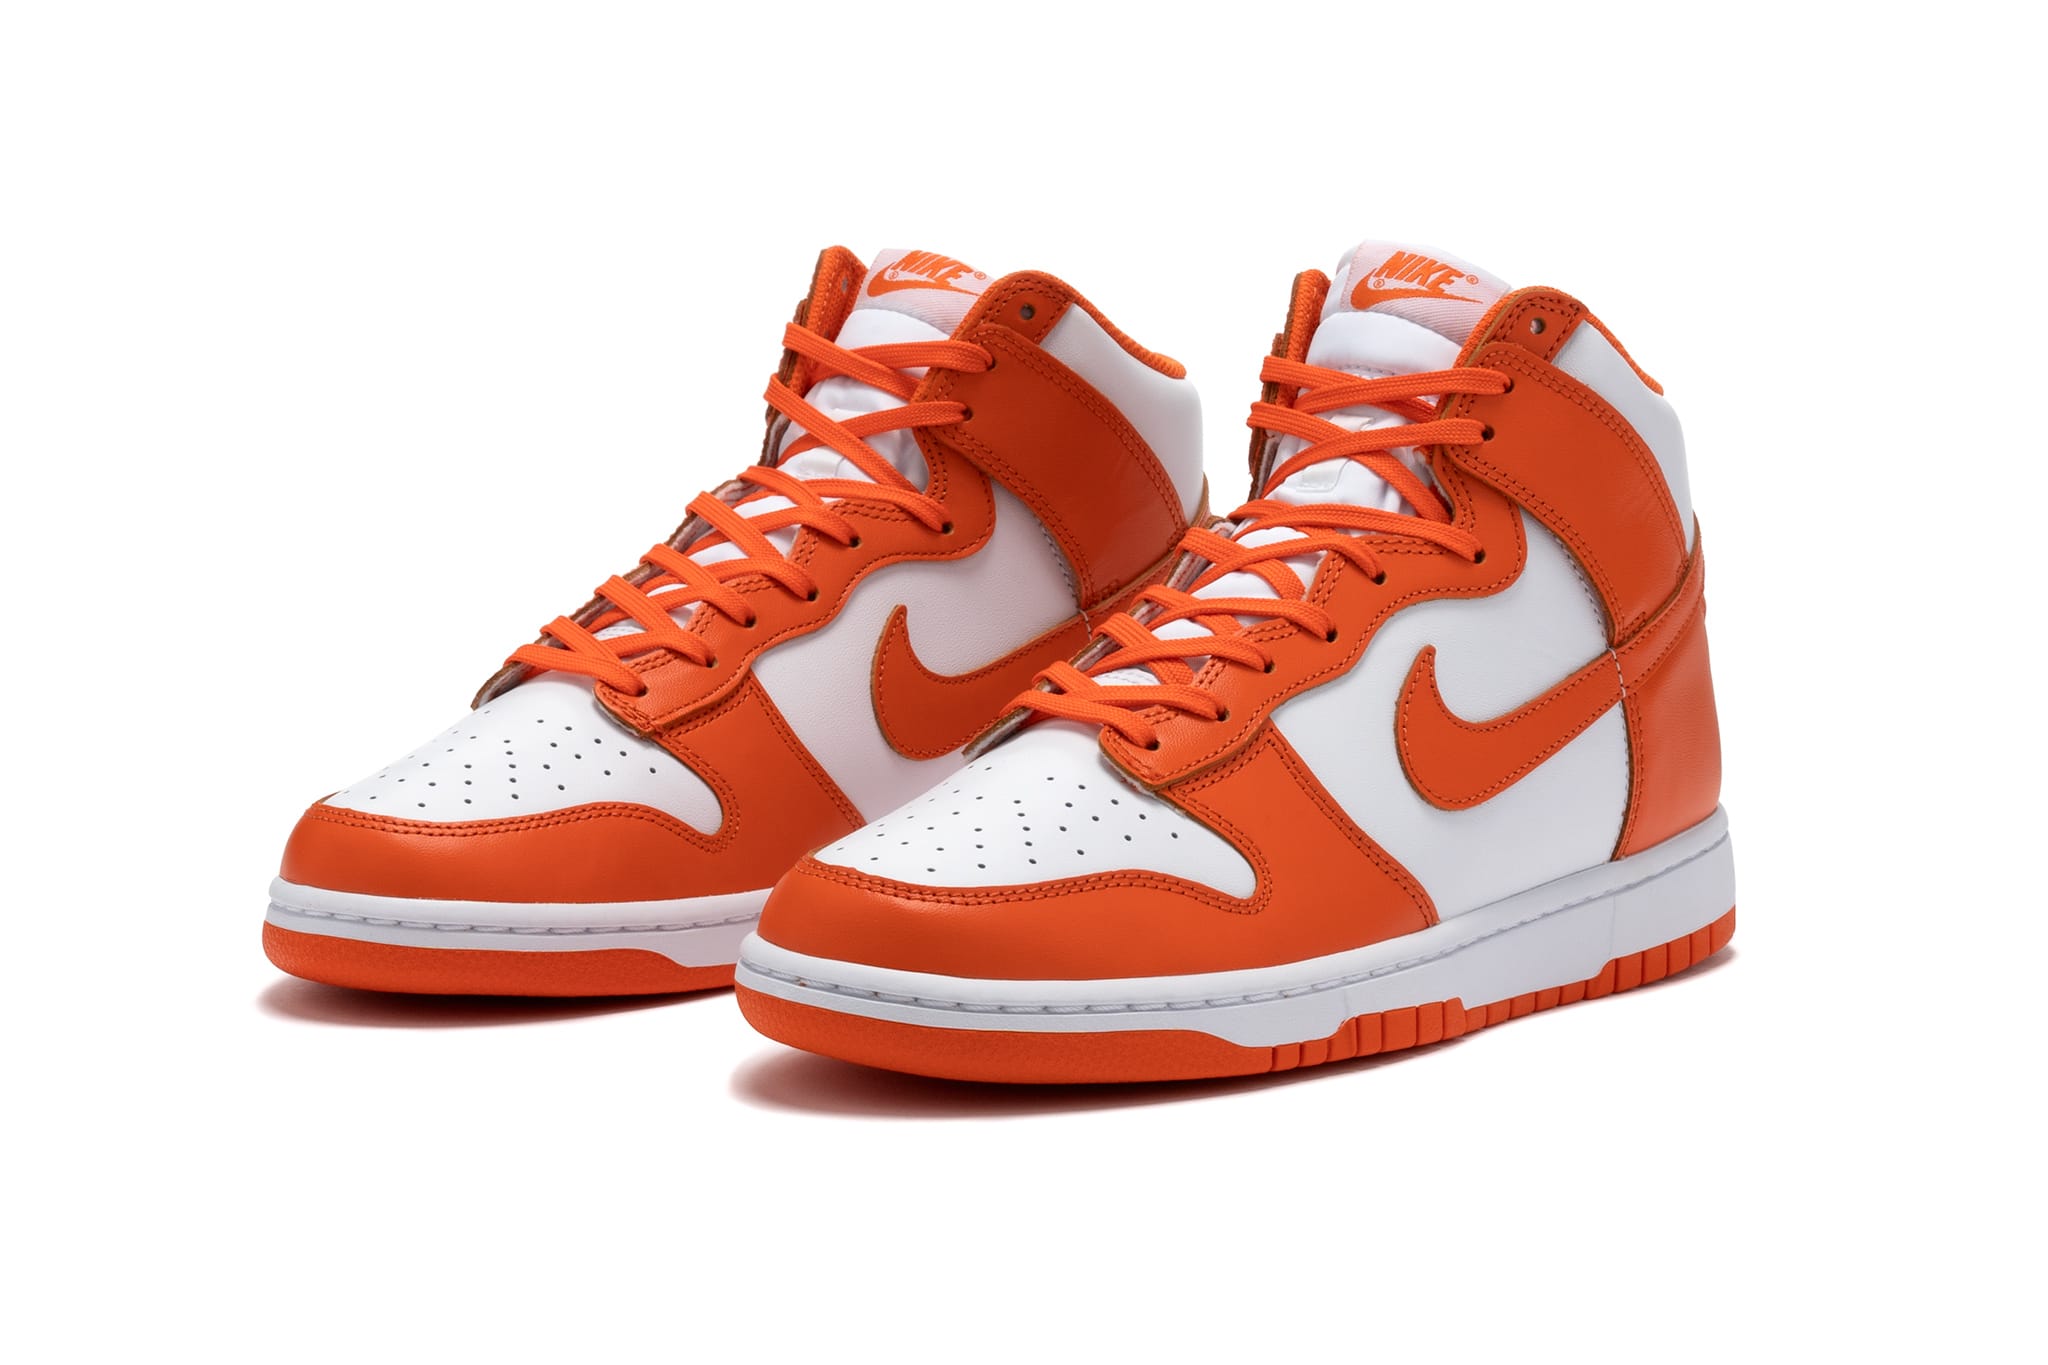 Dunk High Retro 'Syracuse' | Release Date: 03.10.21 | HAVEN